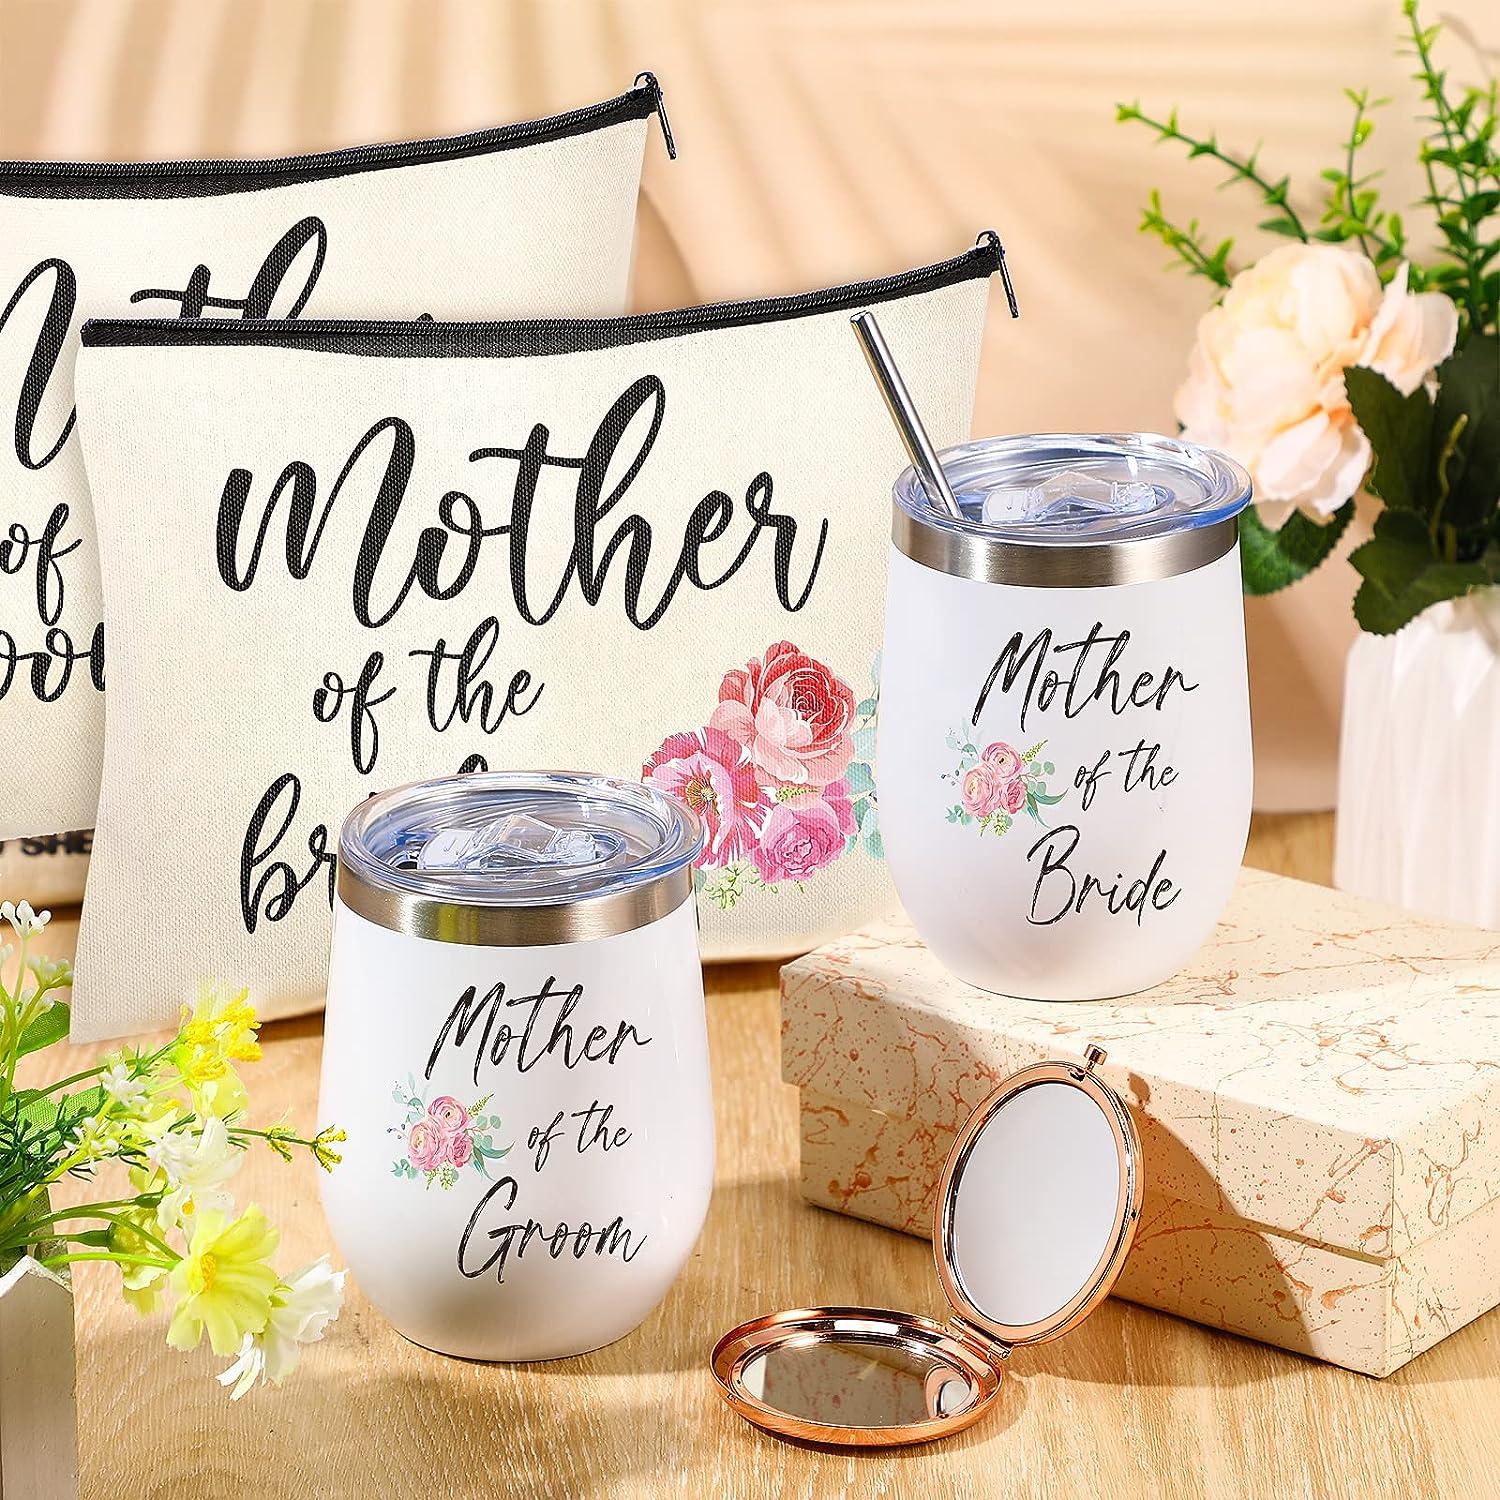 Father of the Bride Gift Ideas — Bridal Party Gifts to Shop-hangkhonggiare.com.vn